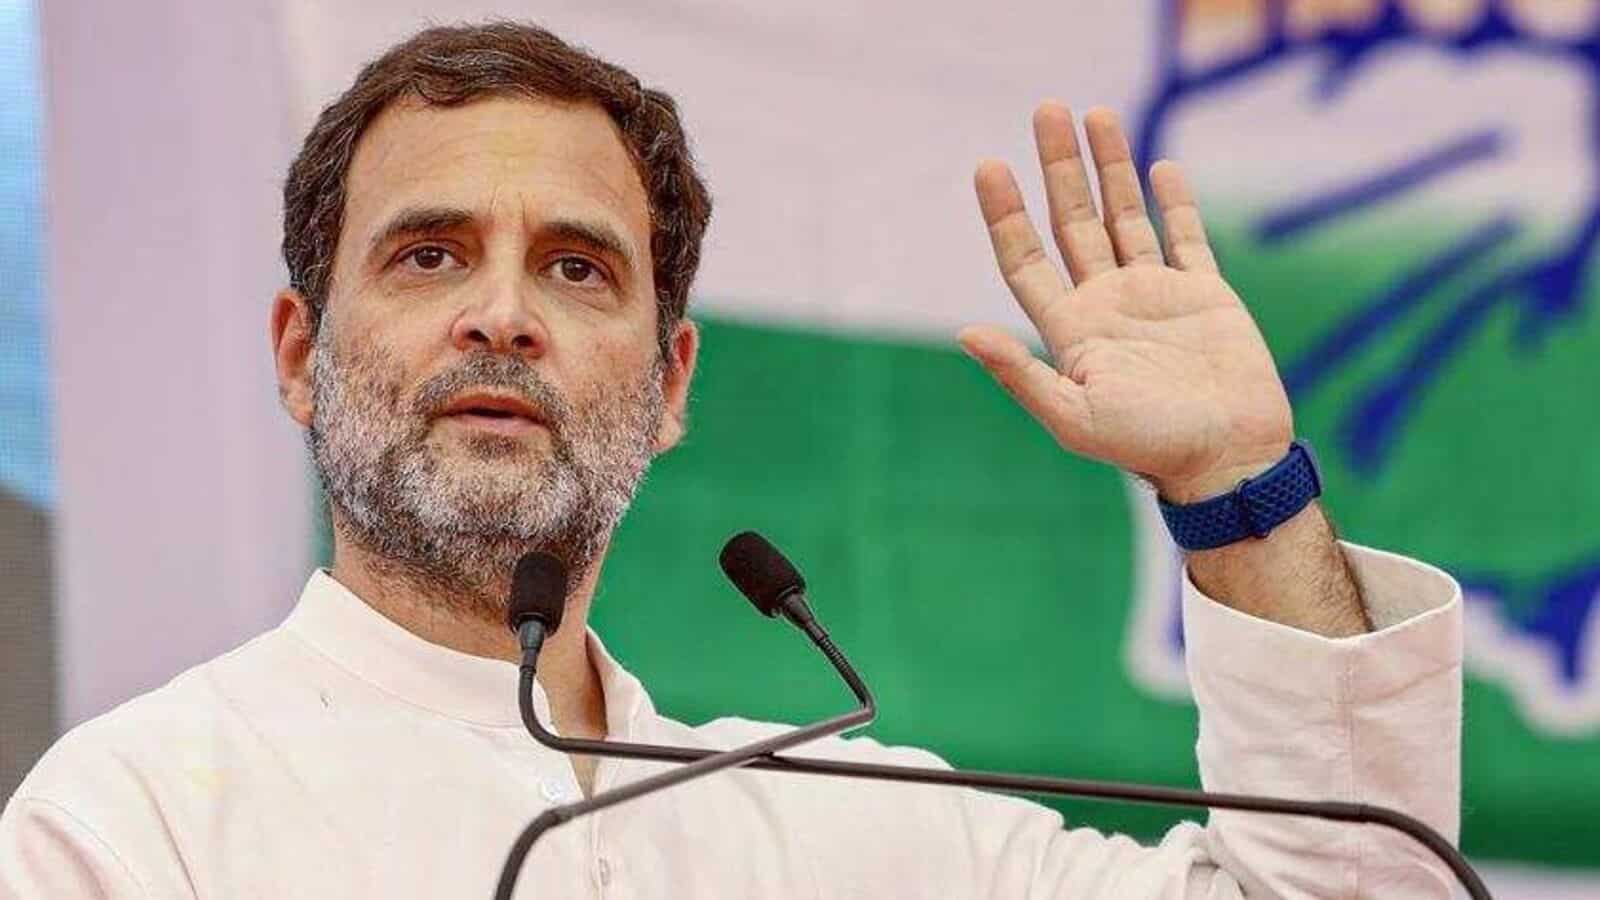 Rahul criticises the PM’s ‘Mann ki Baat,’ claiming that his party listens to people 8 hours a day